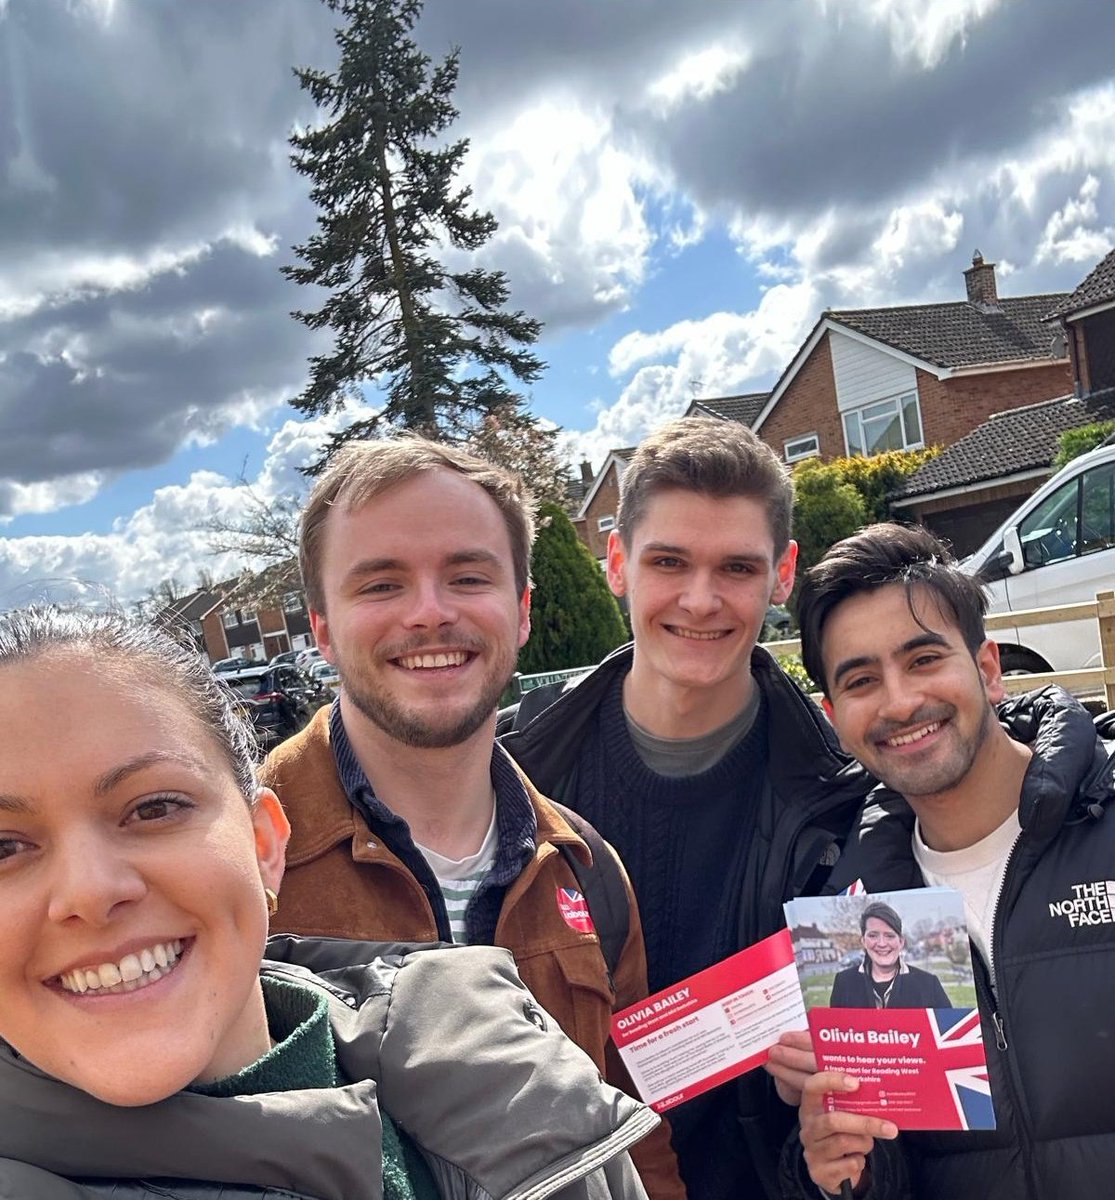 On the #LabourDoorstep for @livbailey with @LGBTLabour icons🌹